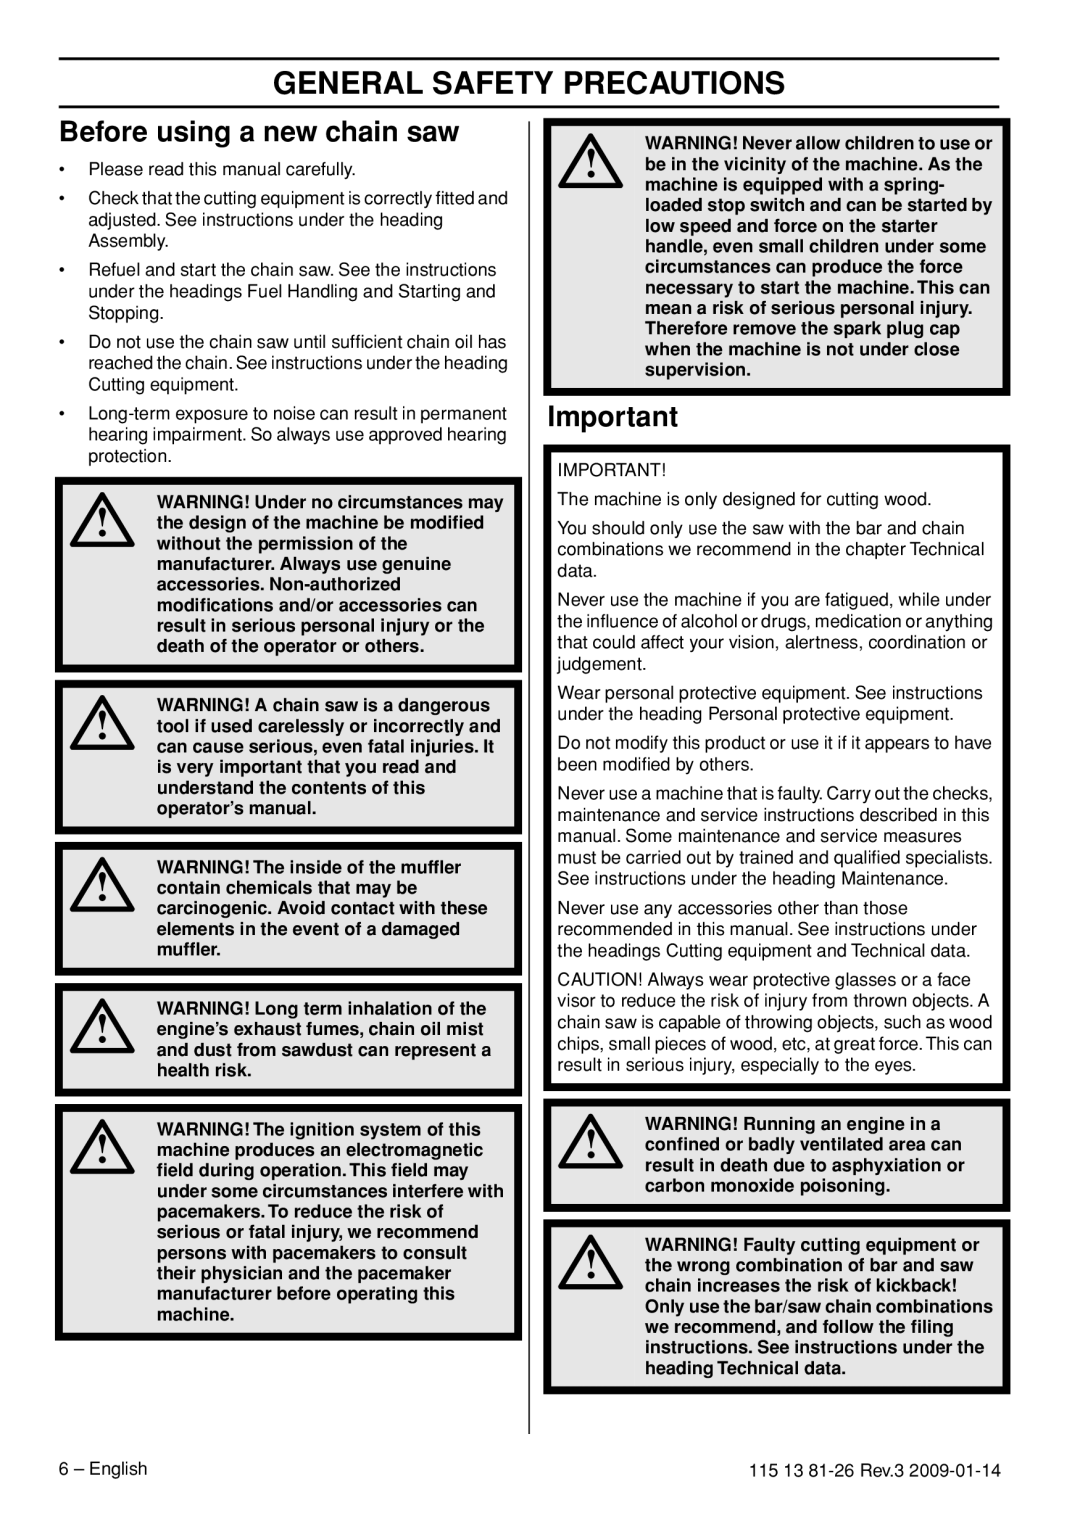 Husqvarna 115 13 81-26 manual General Safety Precautions, Before using a new chain saw 